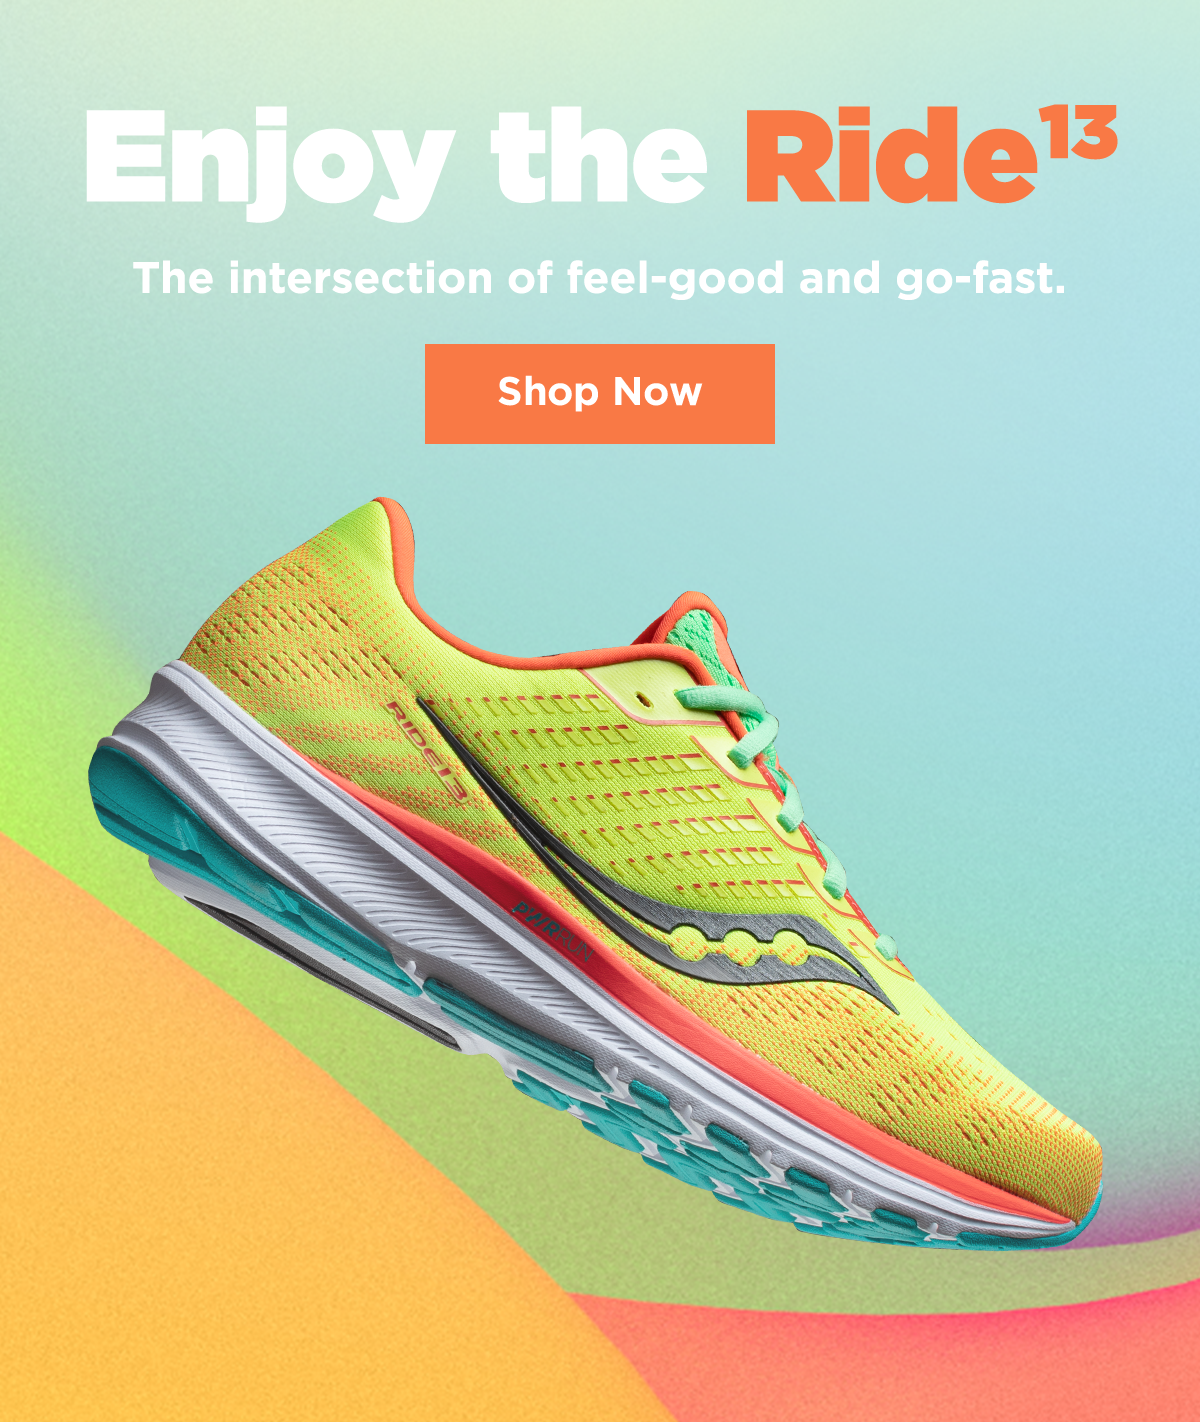 saucony email